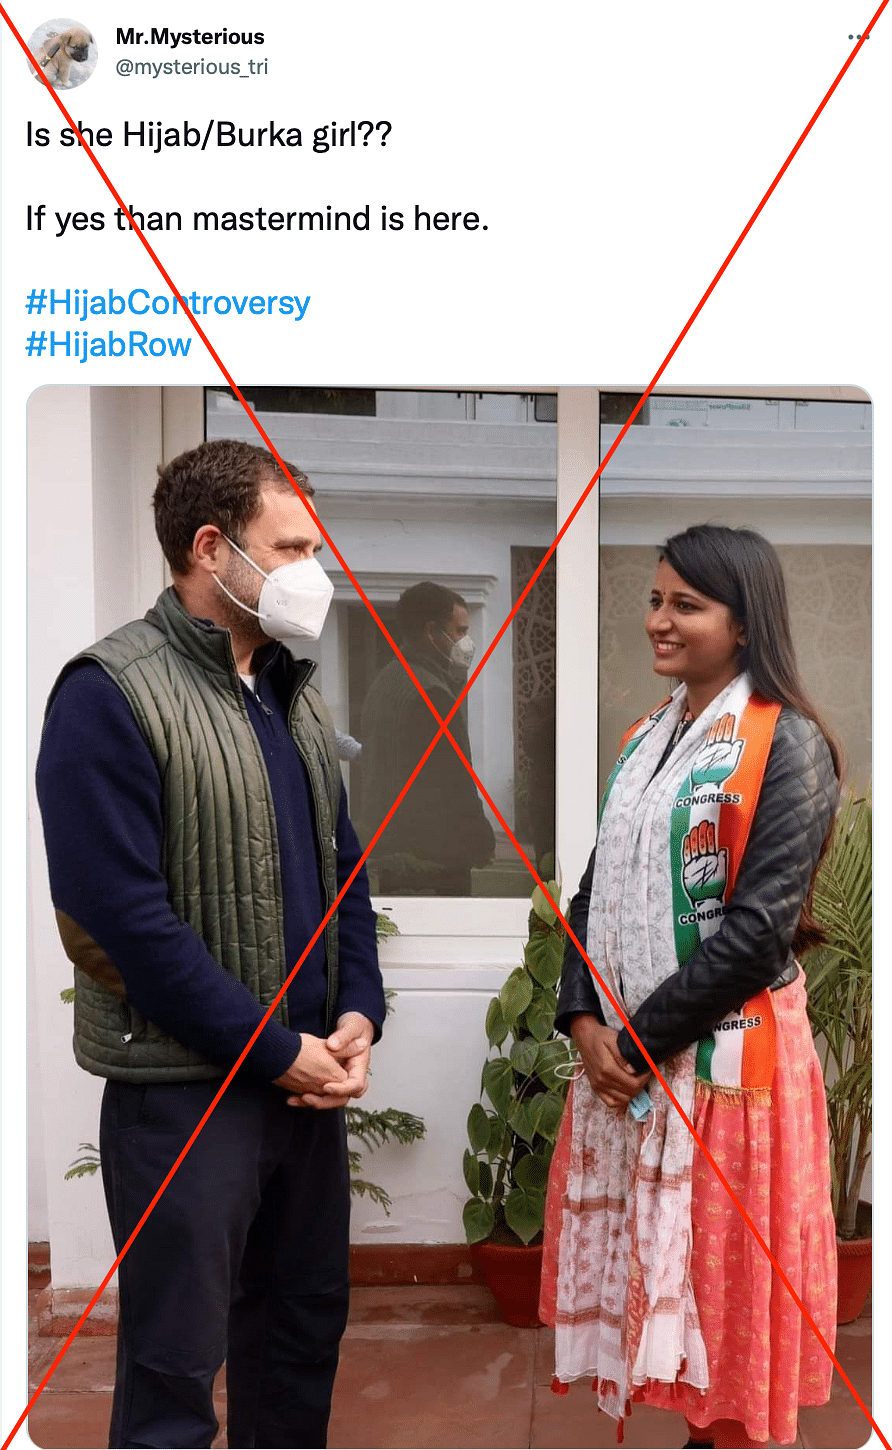 The woman seen in the photo with Rahul Gandhi is Barkagaon MLA Amba Prasad from Jharkhand.